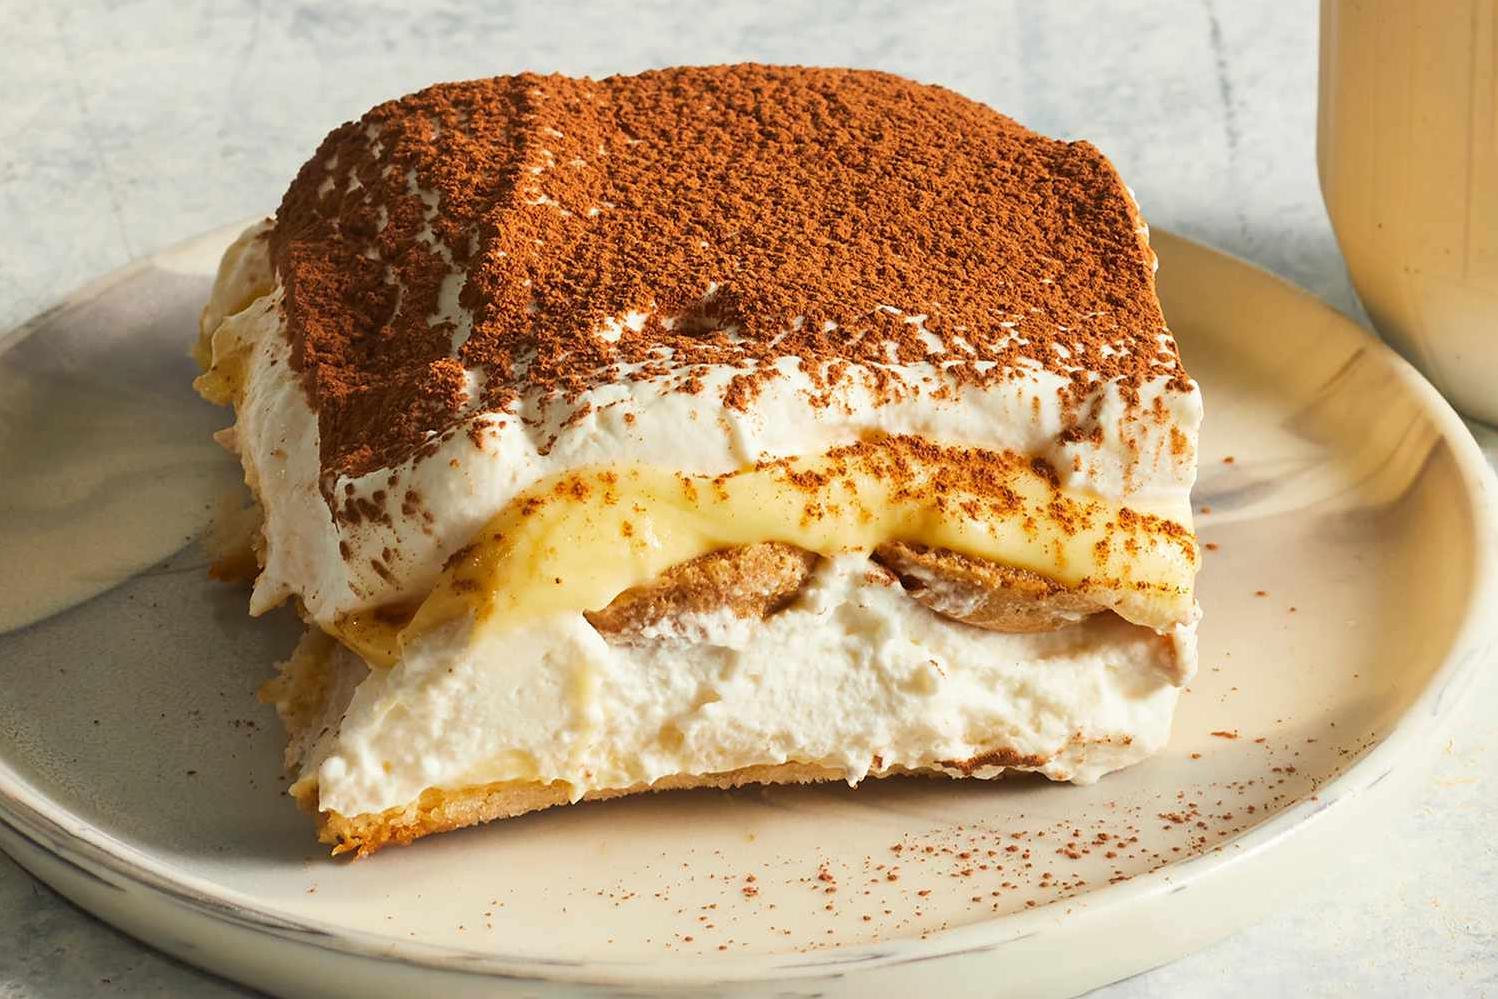  A perfect blend of coffee, mascarpone, ladyfingers, and cocoa, this Double Coffee Tiramisu will take your breath away!